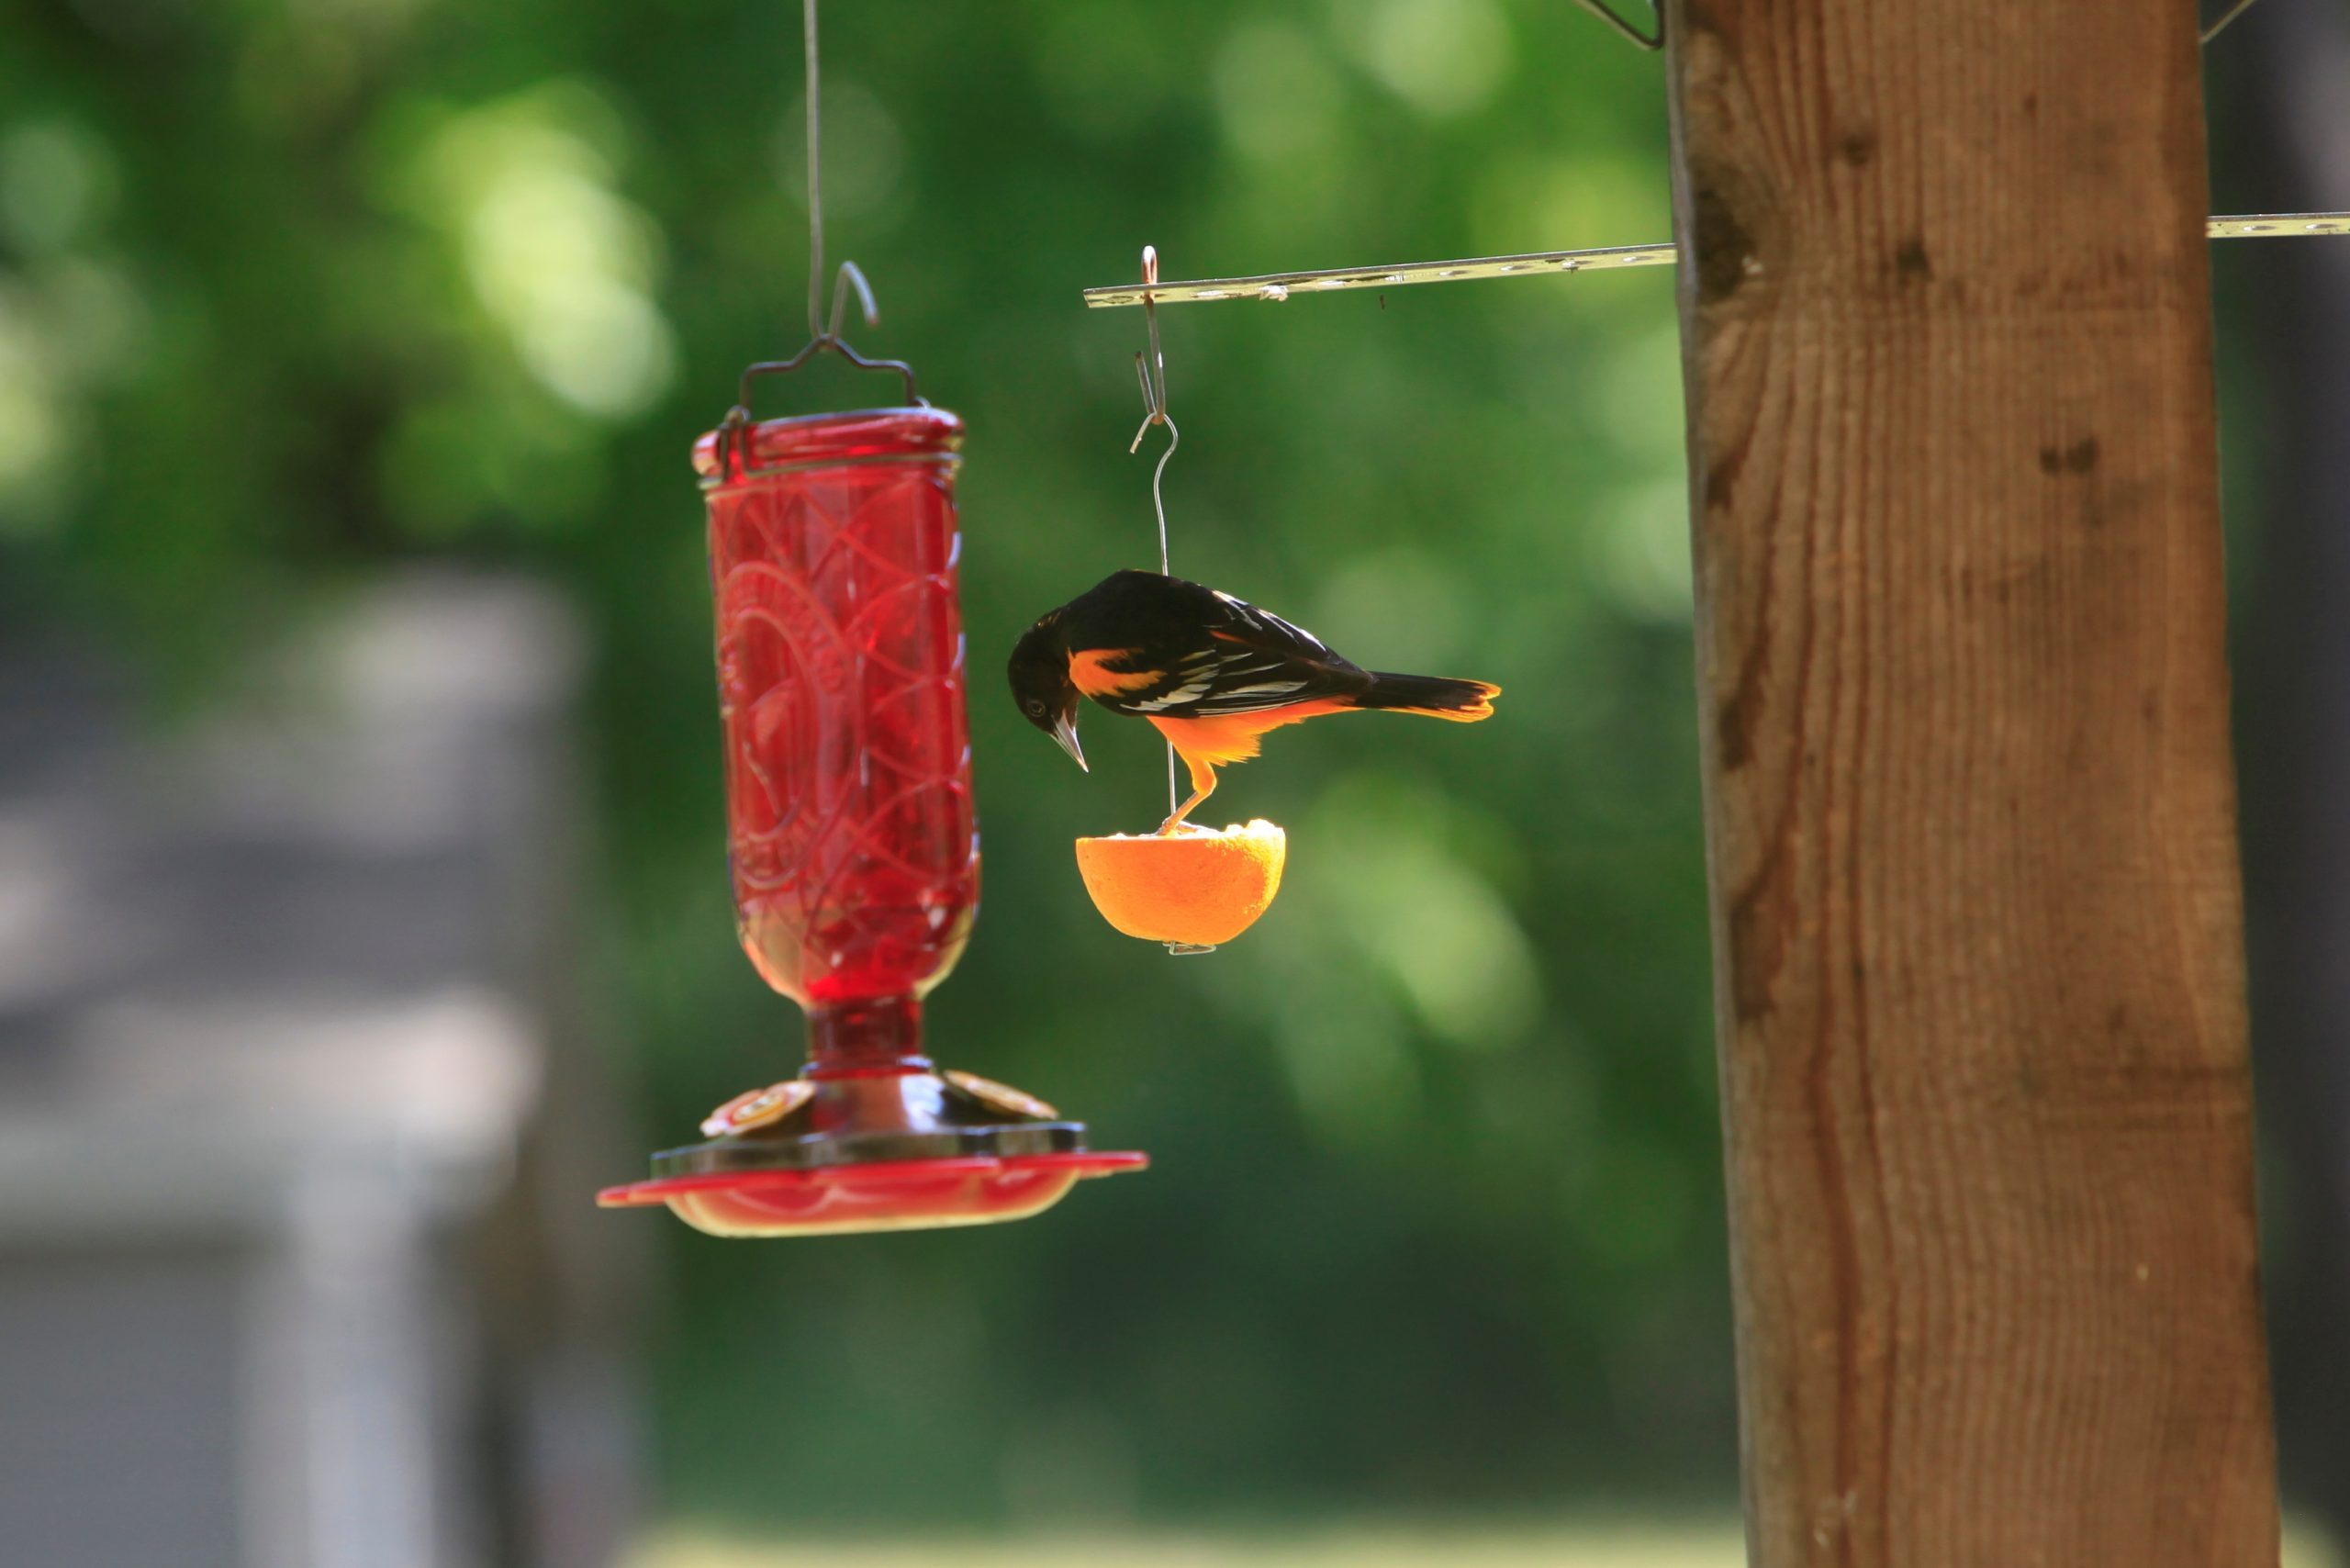 How To Make Homemade Oriole Feeder Orioles Can't Resist This Oriole Nectar Recipe - Birds and Blooms